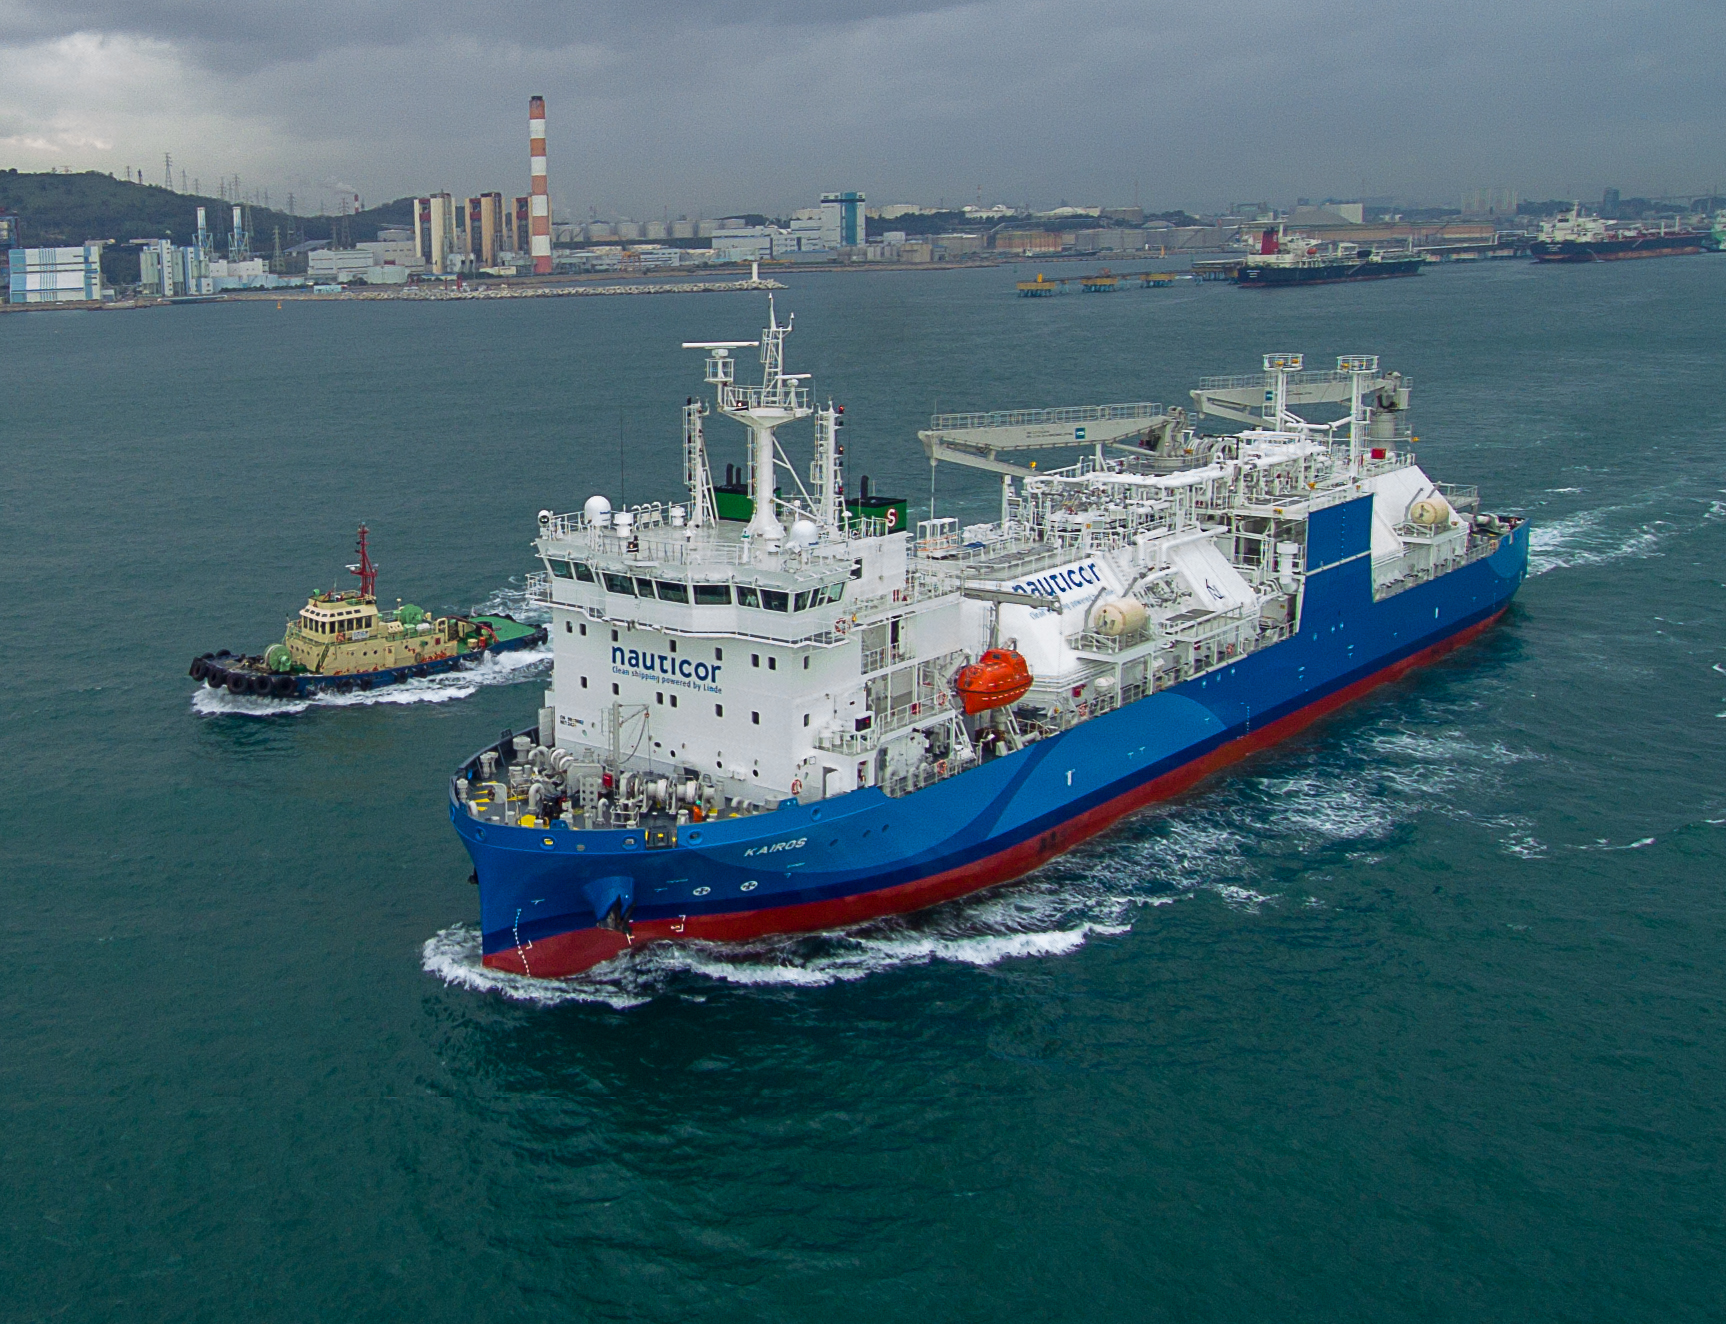 BIMCO to develop LNG bunkering contract